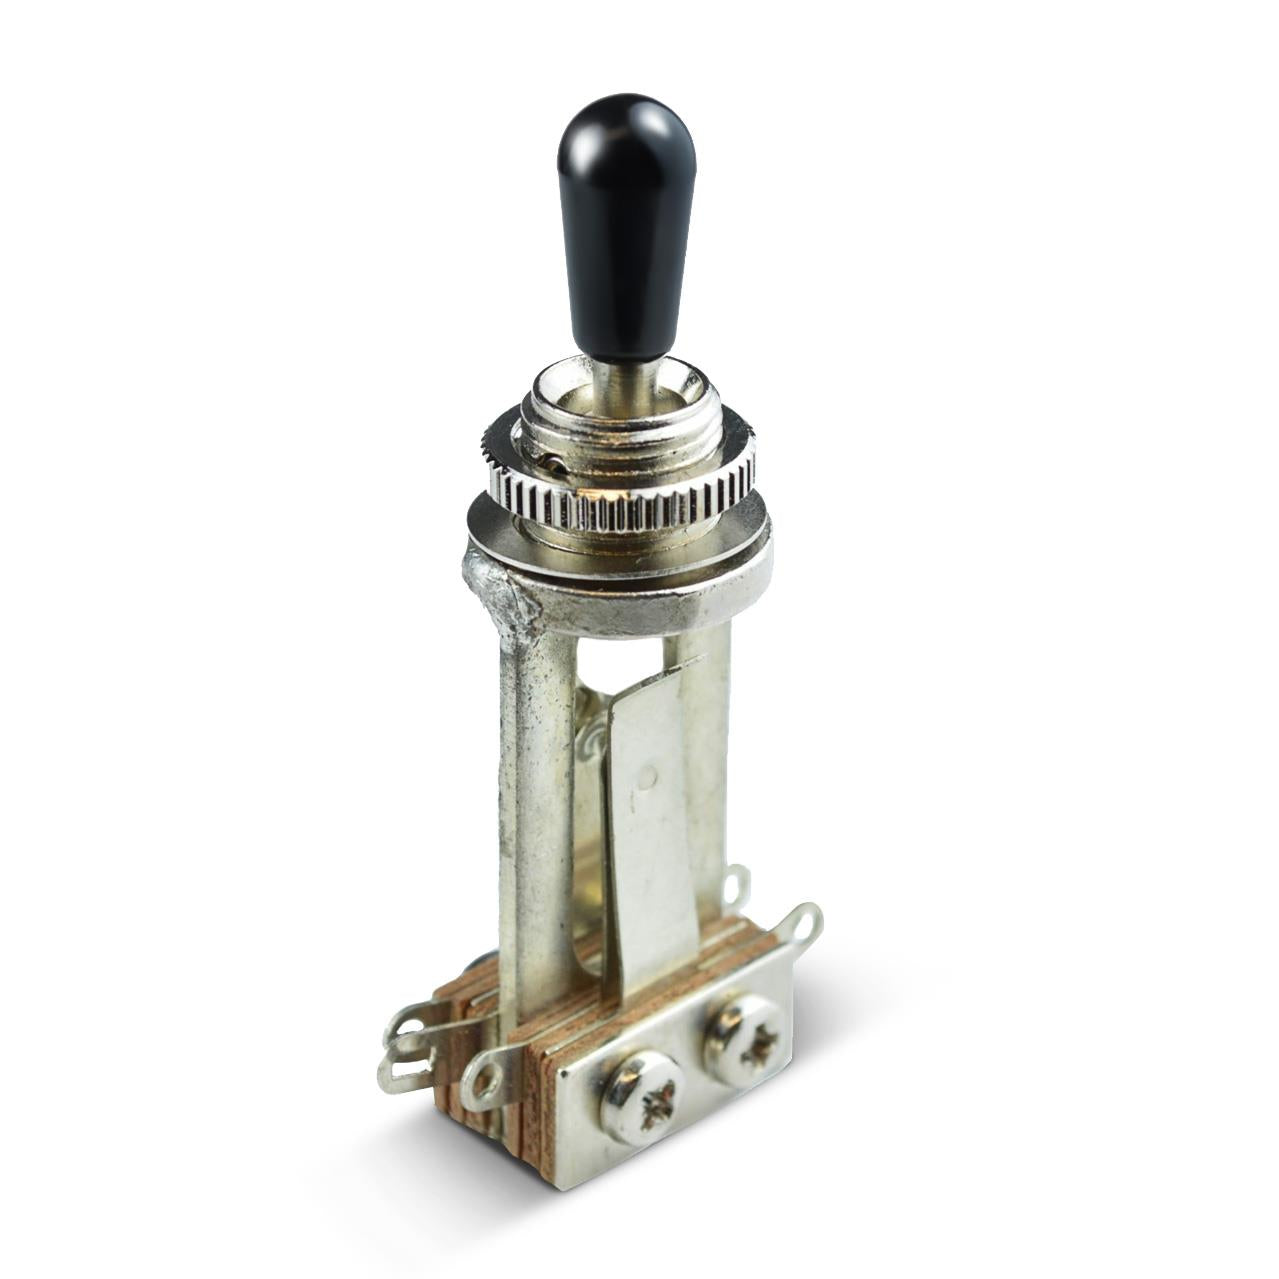 Straight 3-way Toggle Switch for Gibson Style Guitars